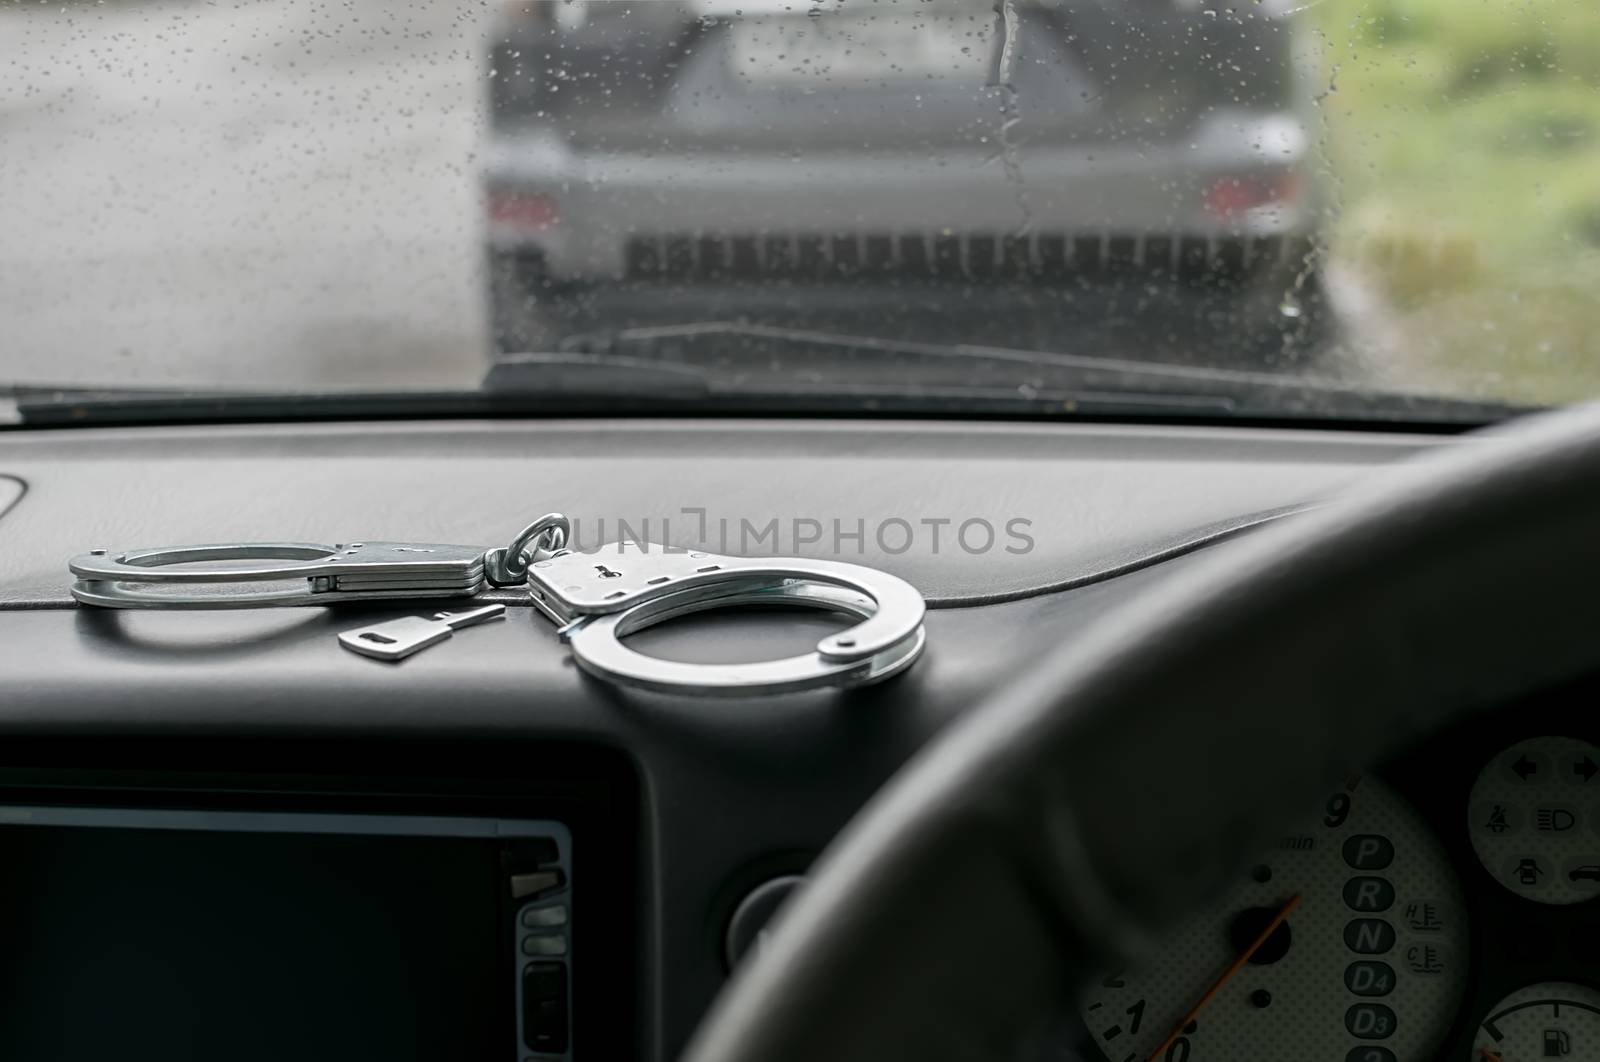 the handcuffs are on the dashboard of the car by jk3030